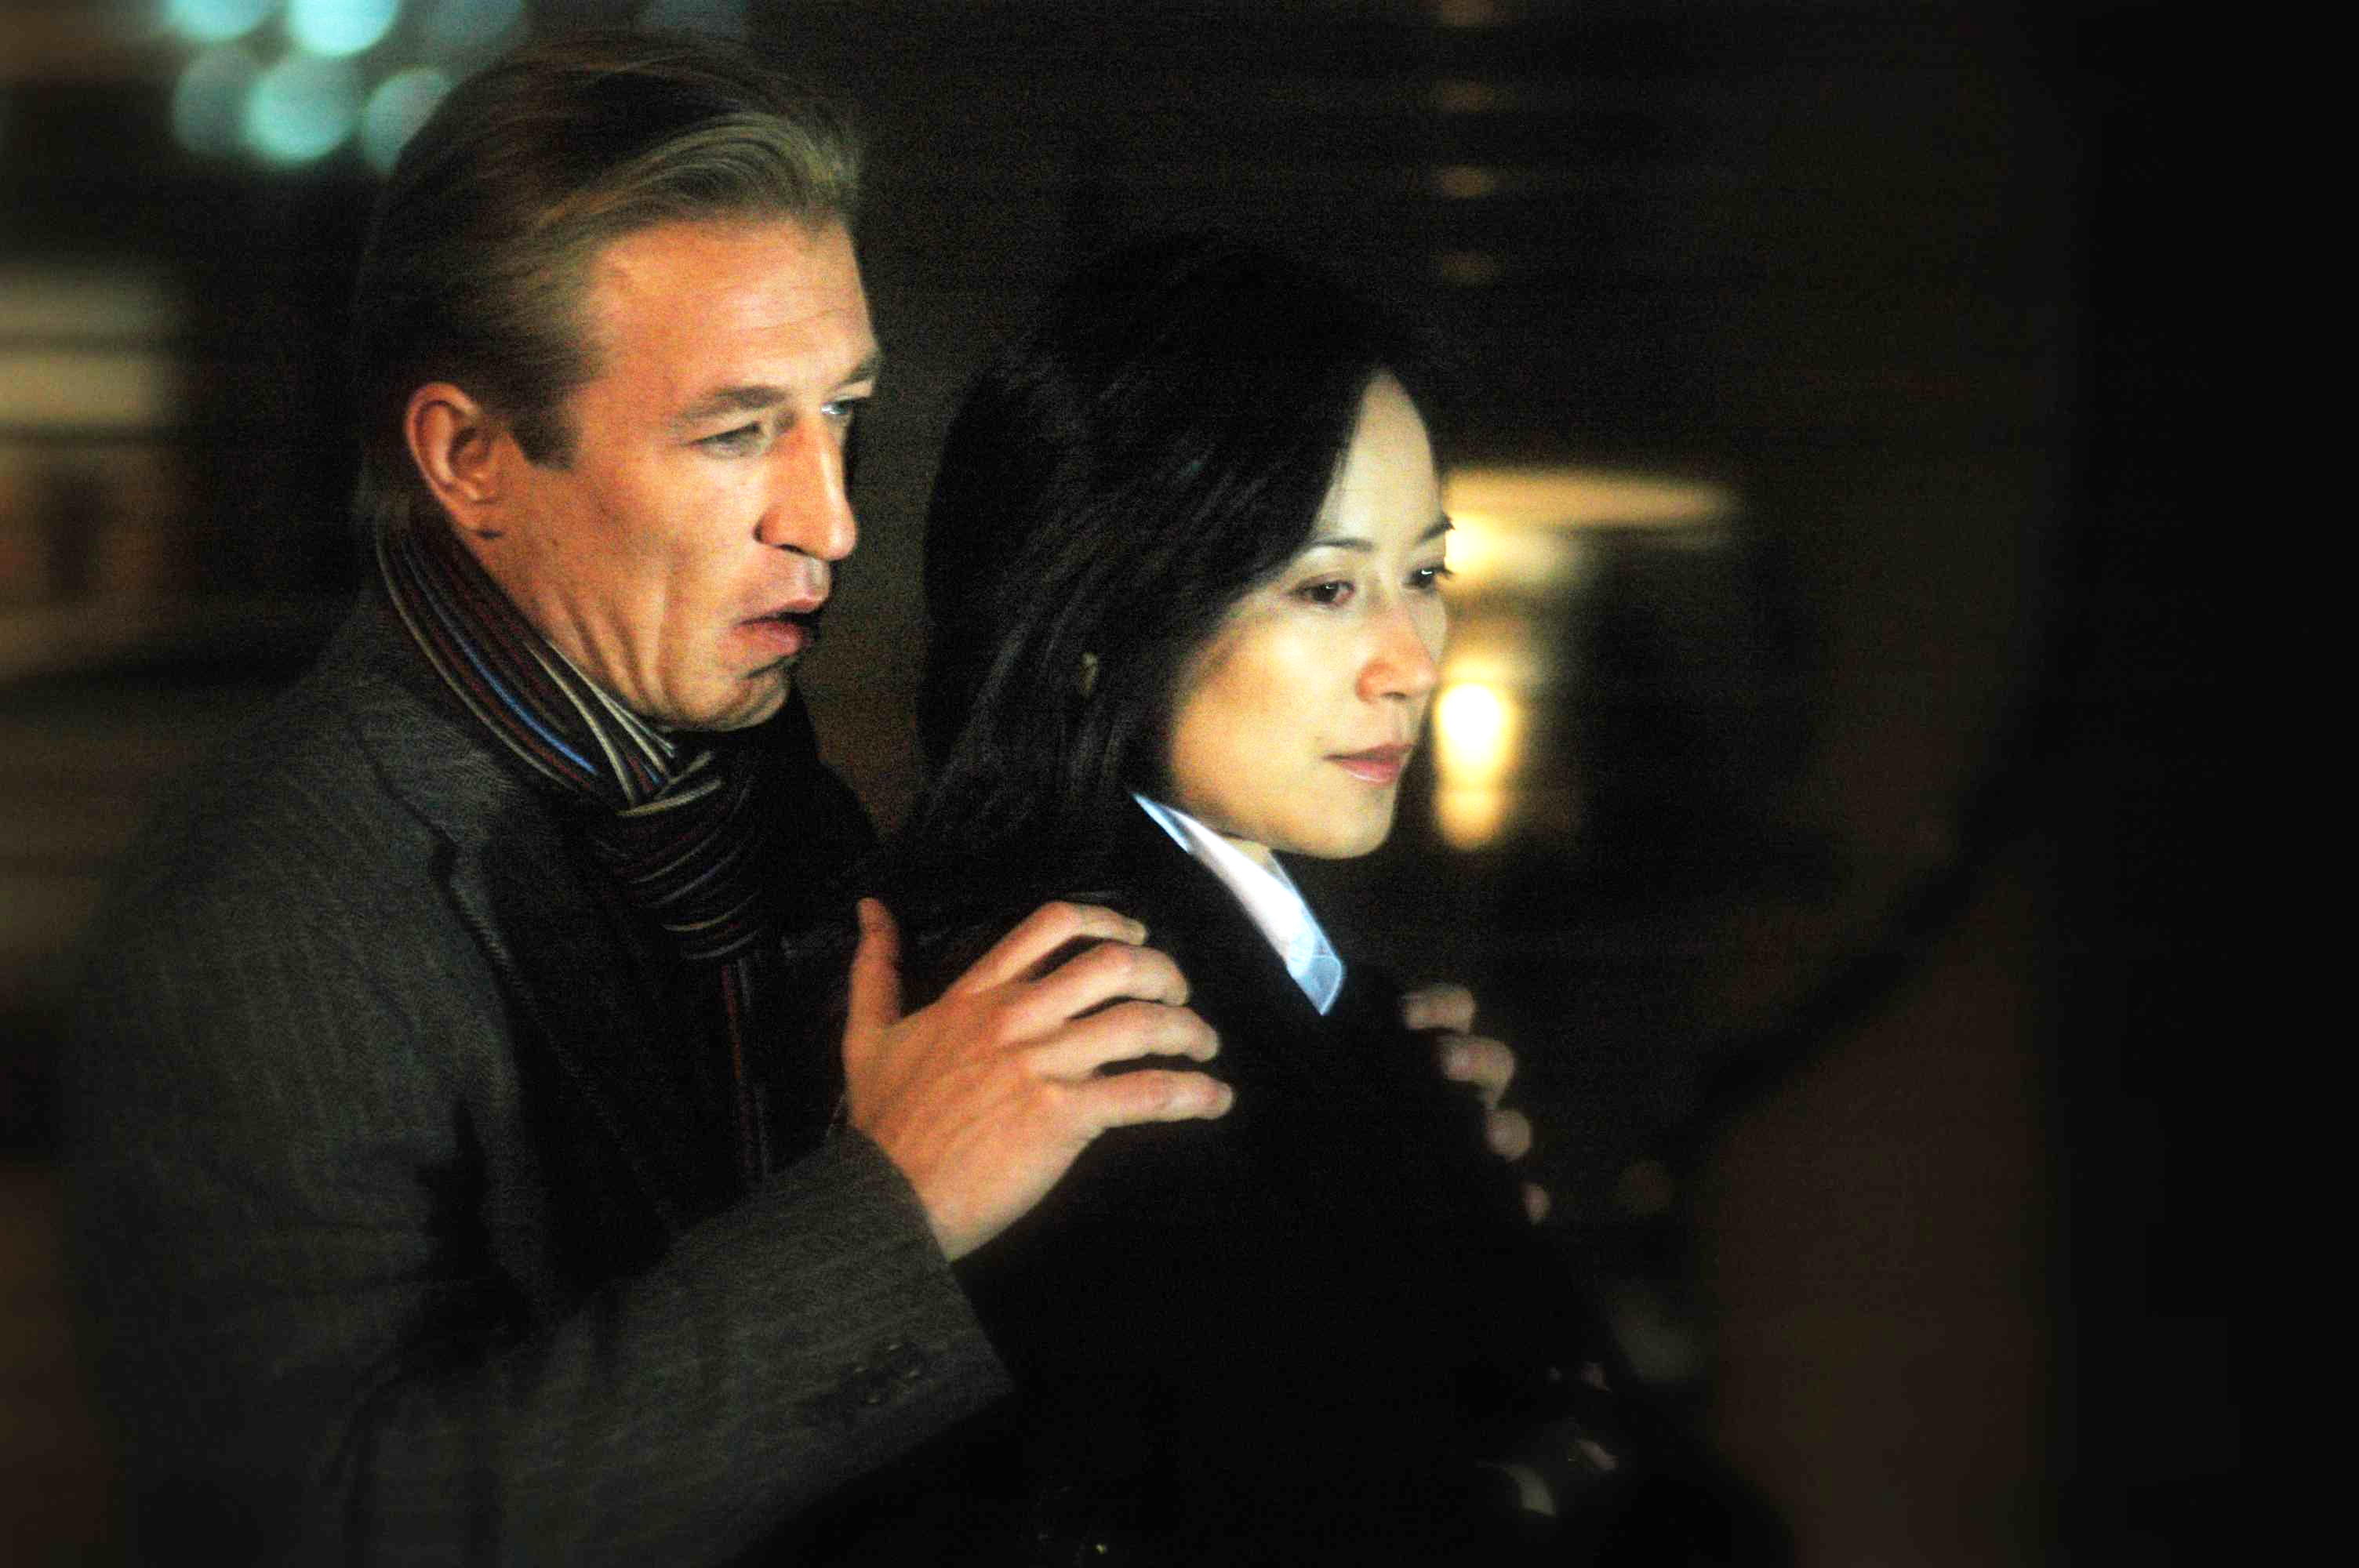 Pavel Lychnikoff stars as Boris and Faye Yu stars as Yilan in Magnolia Pictures' A Thousand Years of Good Prayers (2008)